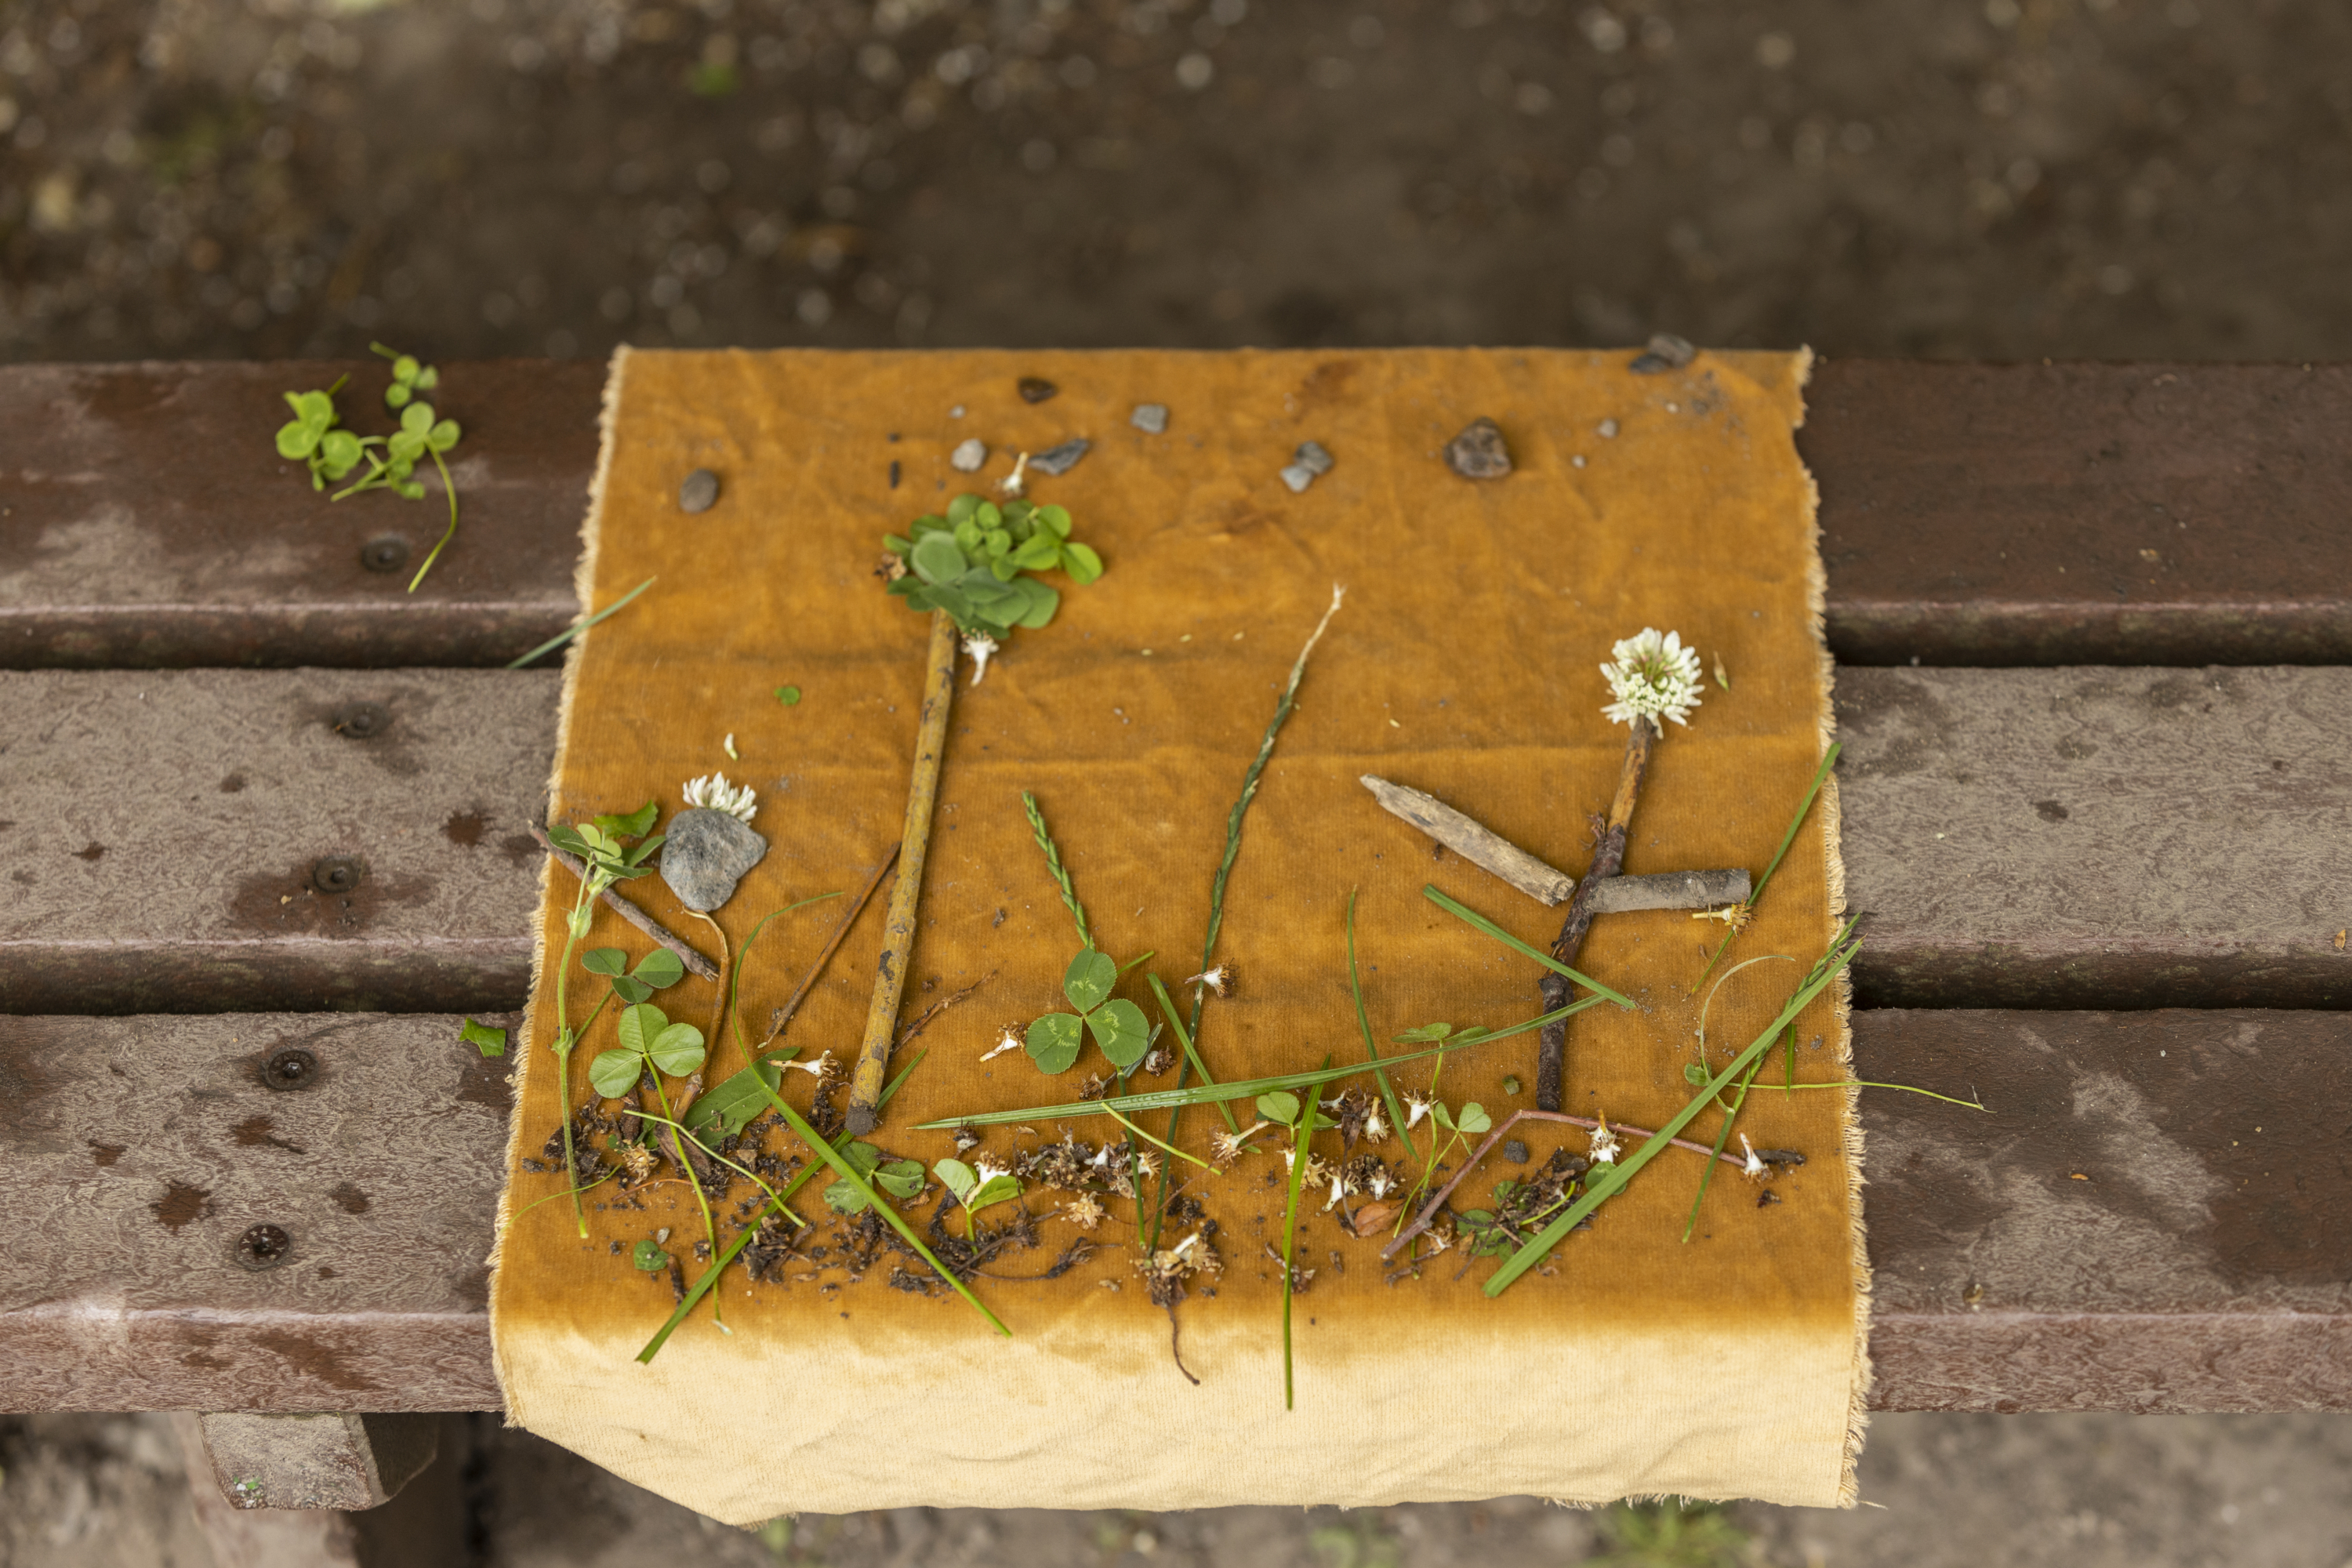 Picture created with natural objects including grass and flowers